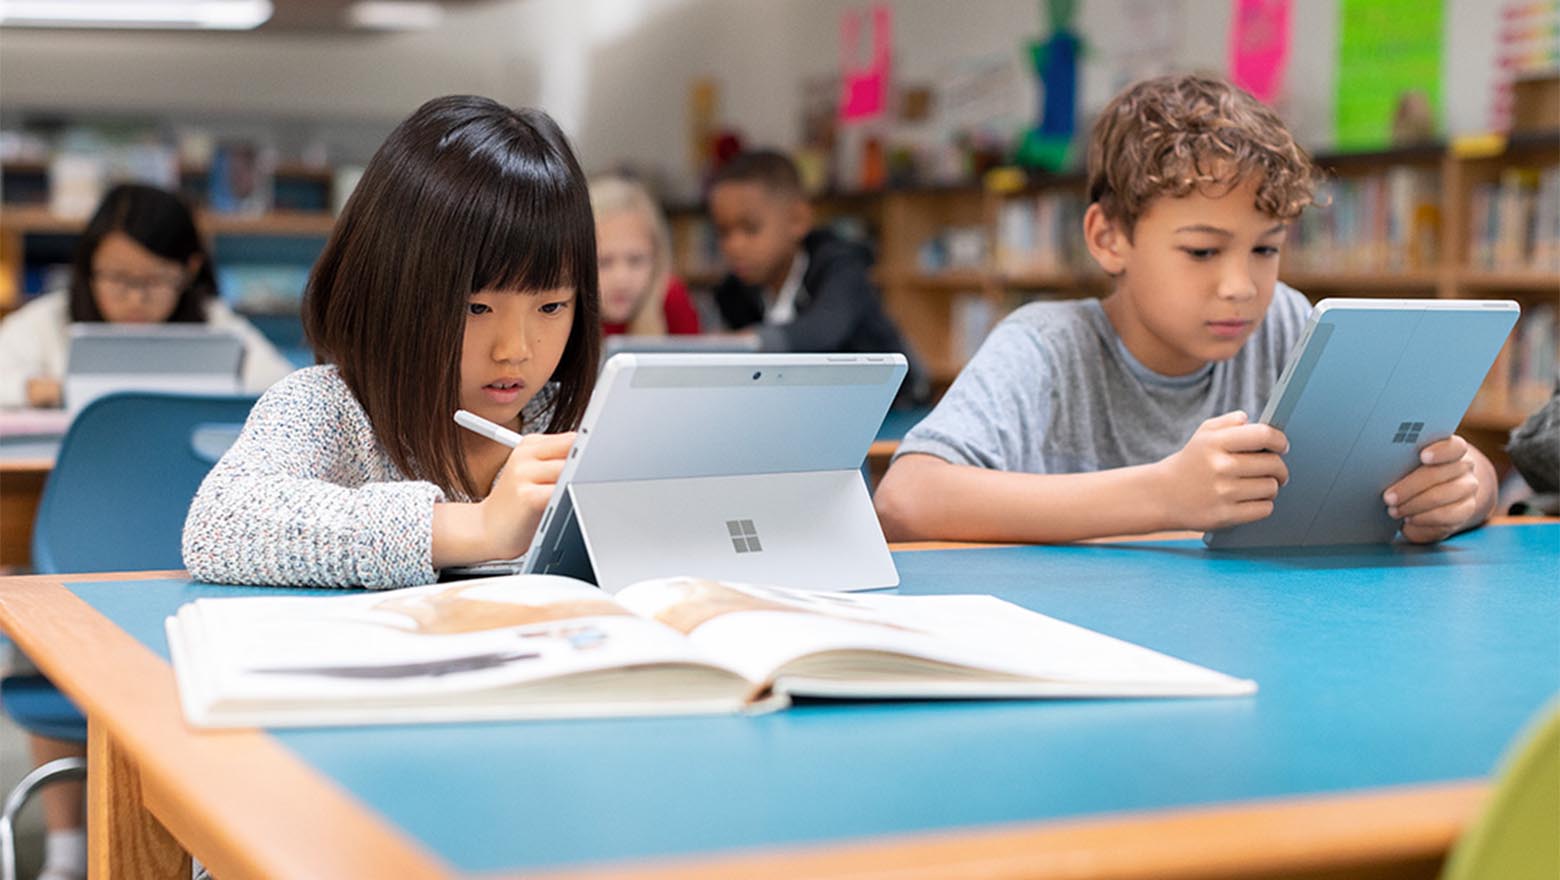 Students with Surface devices